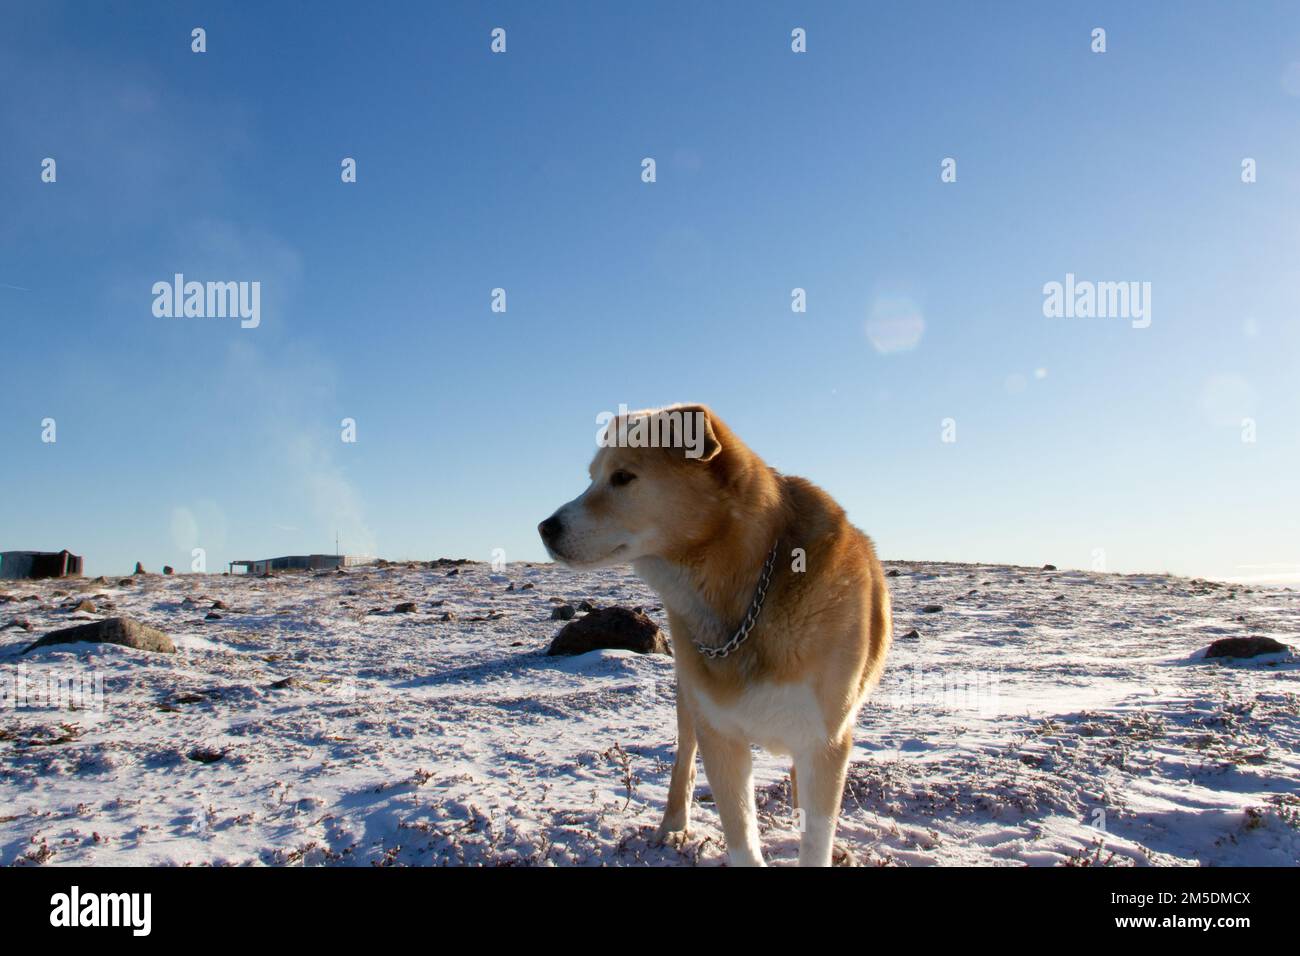 A yellow Labrador dog standing on snow in a cold arctic landscape, near Arviat, Nunavut Canada Stock Photo